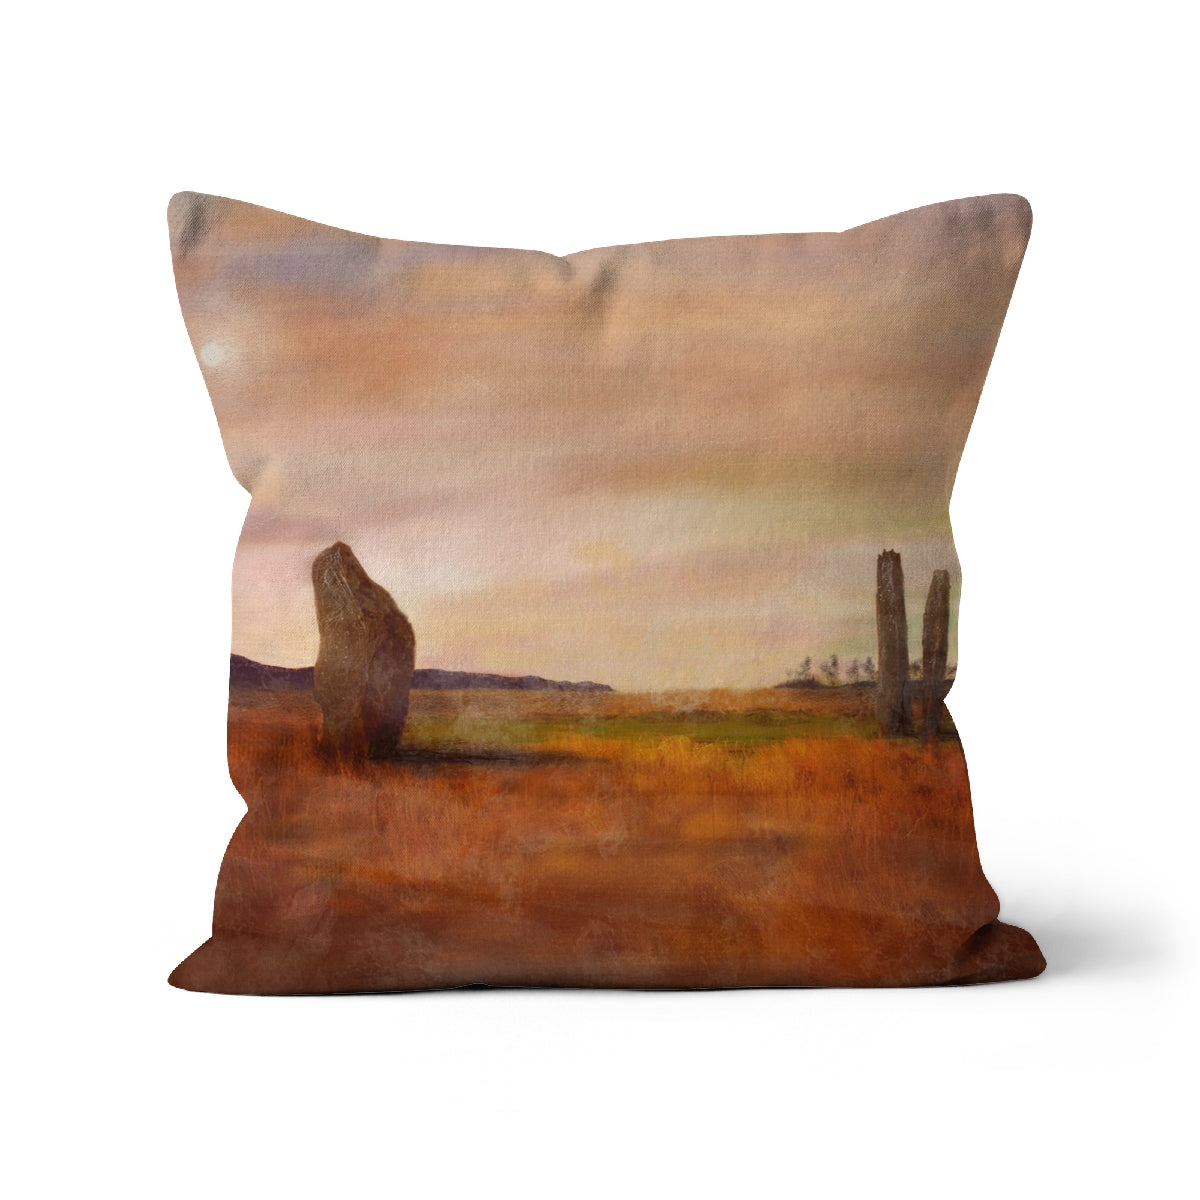 Machrie Moor Arran Art Gifts Cushion-Cushions-Arran Art Gallery-Canvas-22"x22"-Paintings, Prints, Homeware, Art Gifts From Scotland By Scottish Artist Kevin Hunter